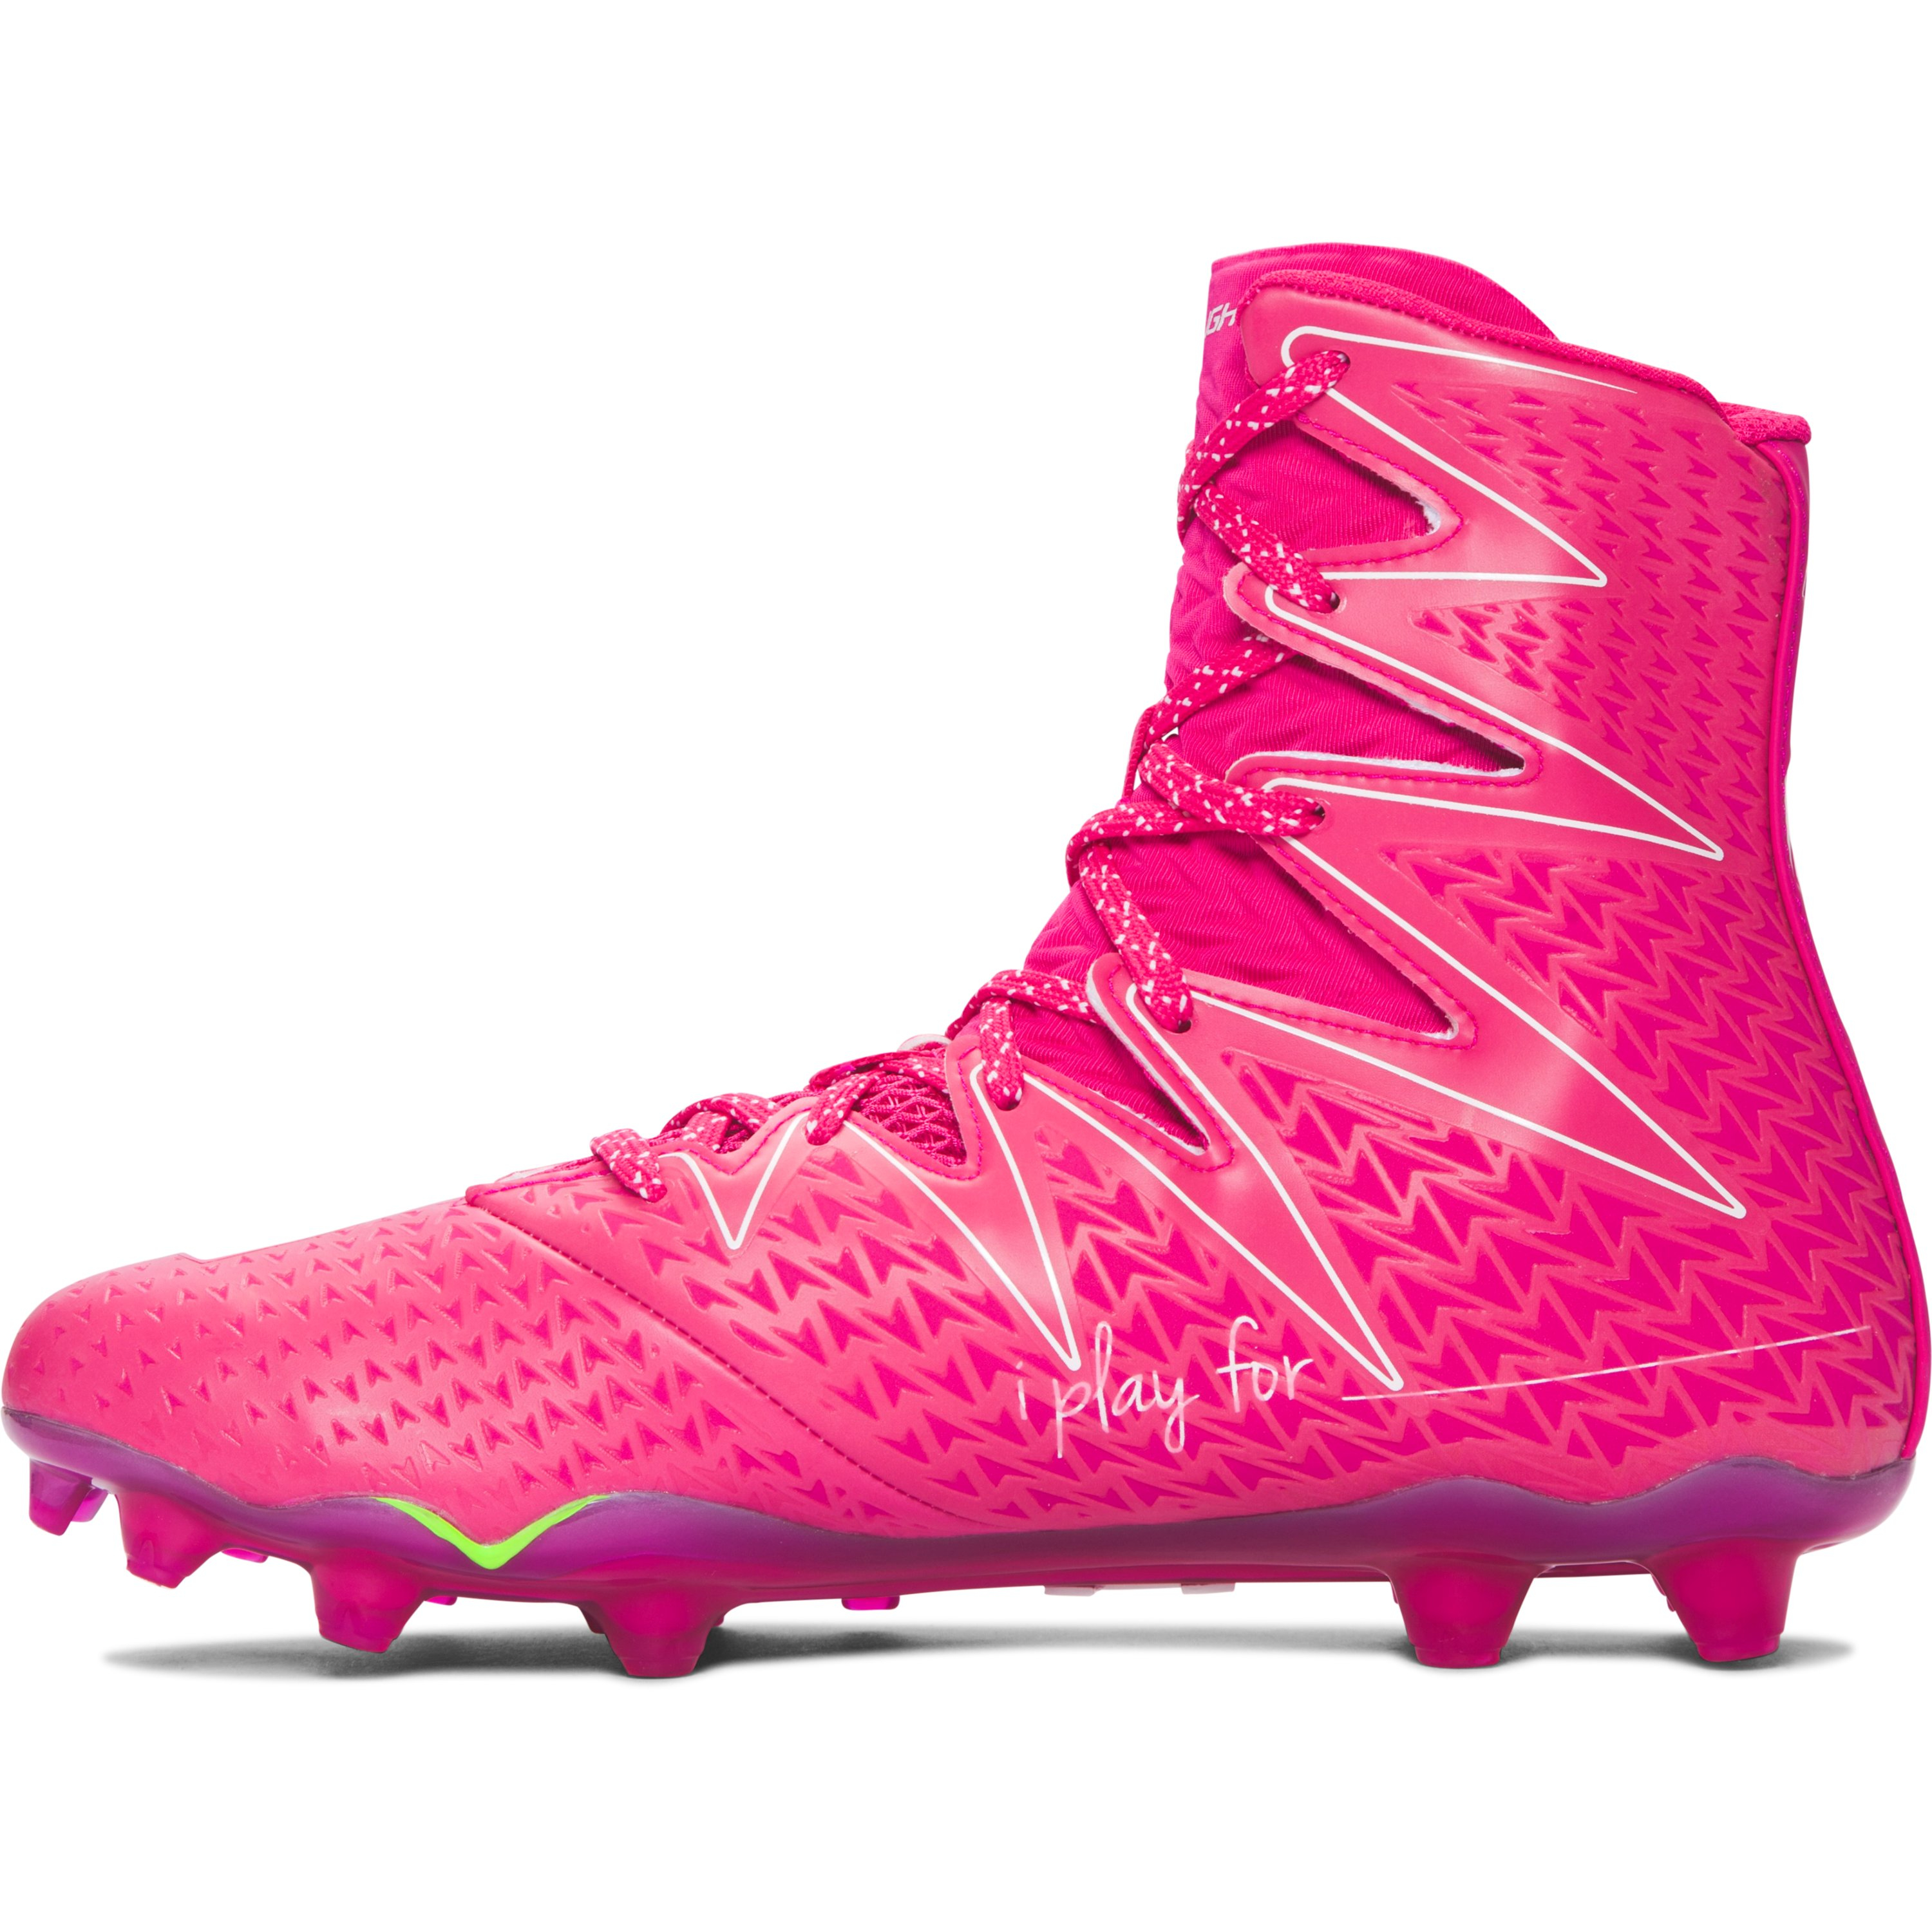 Pink Under Armour Football Gear Lowest Price, 55% OFF | evanstoncinci.org